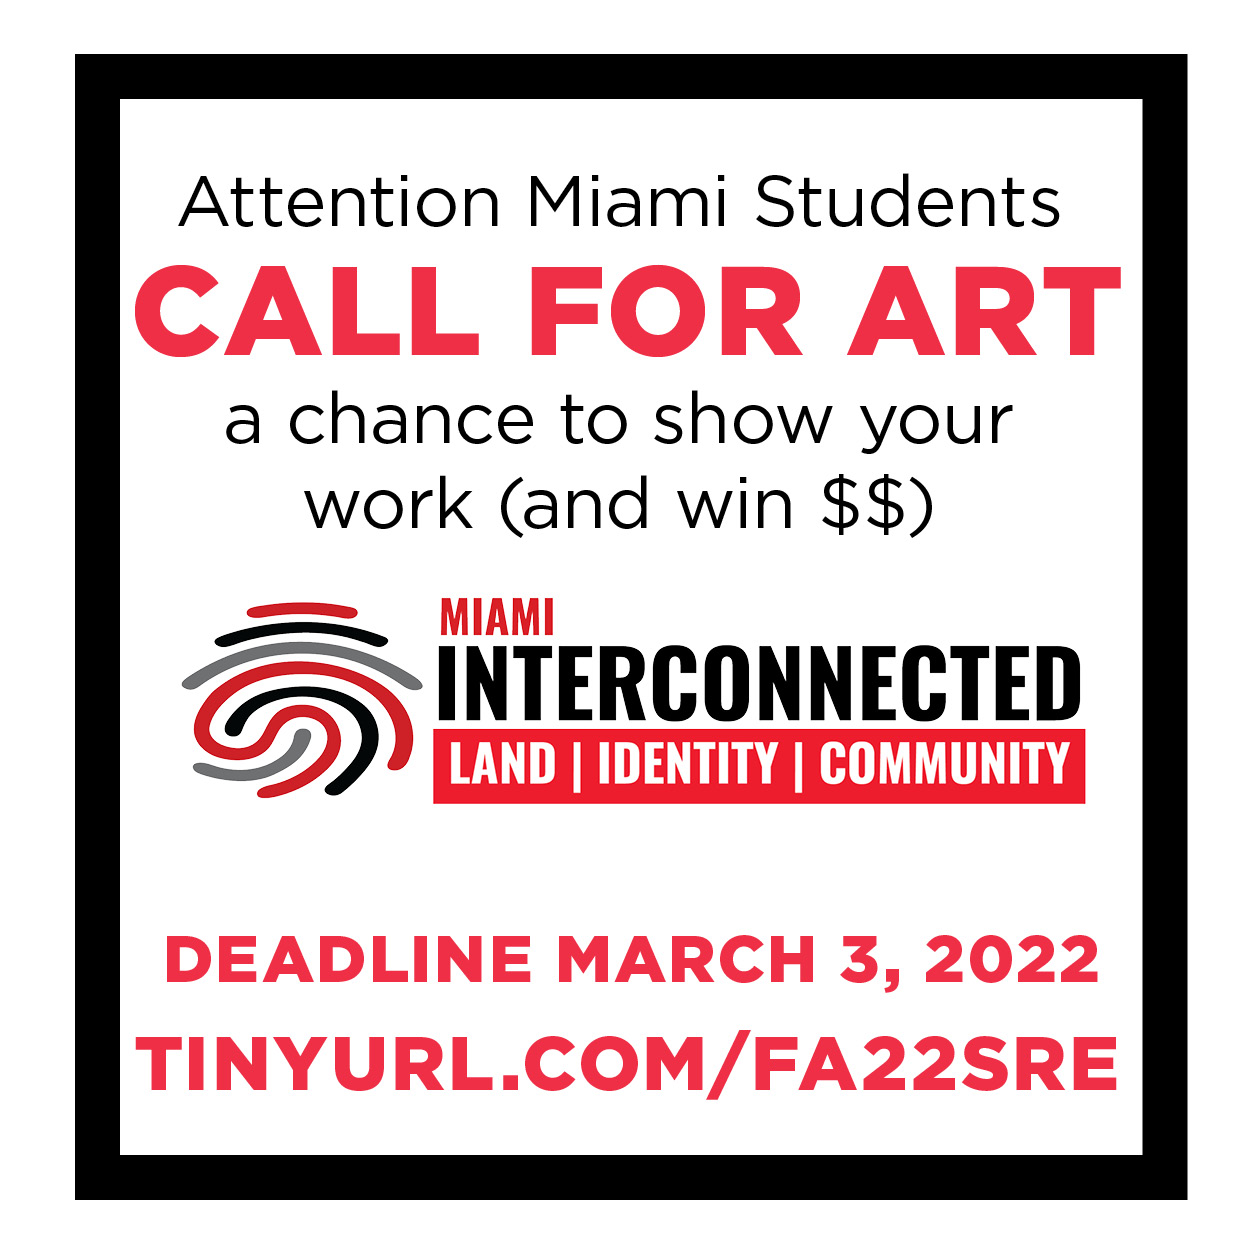 call for art miami students